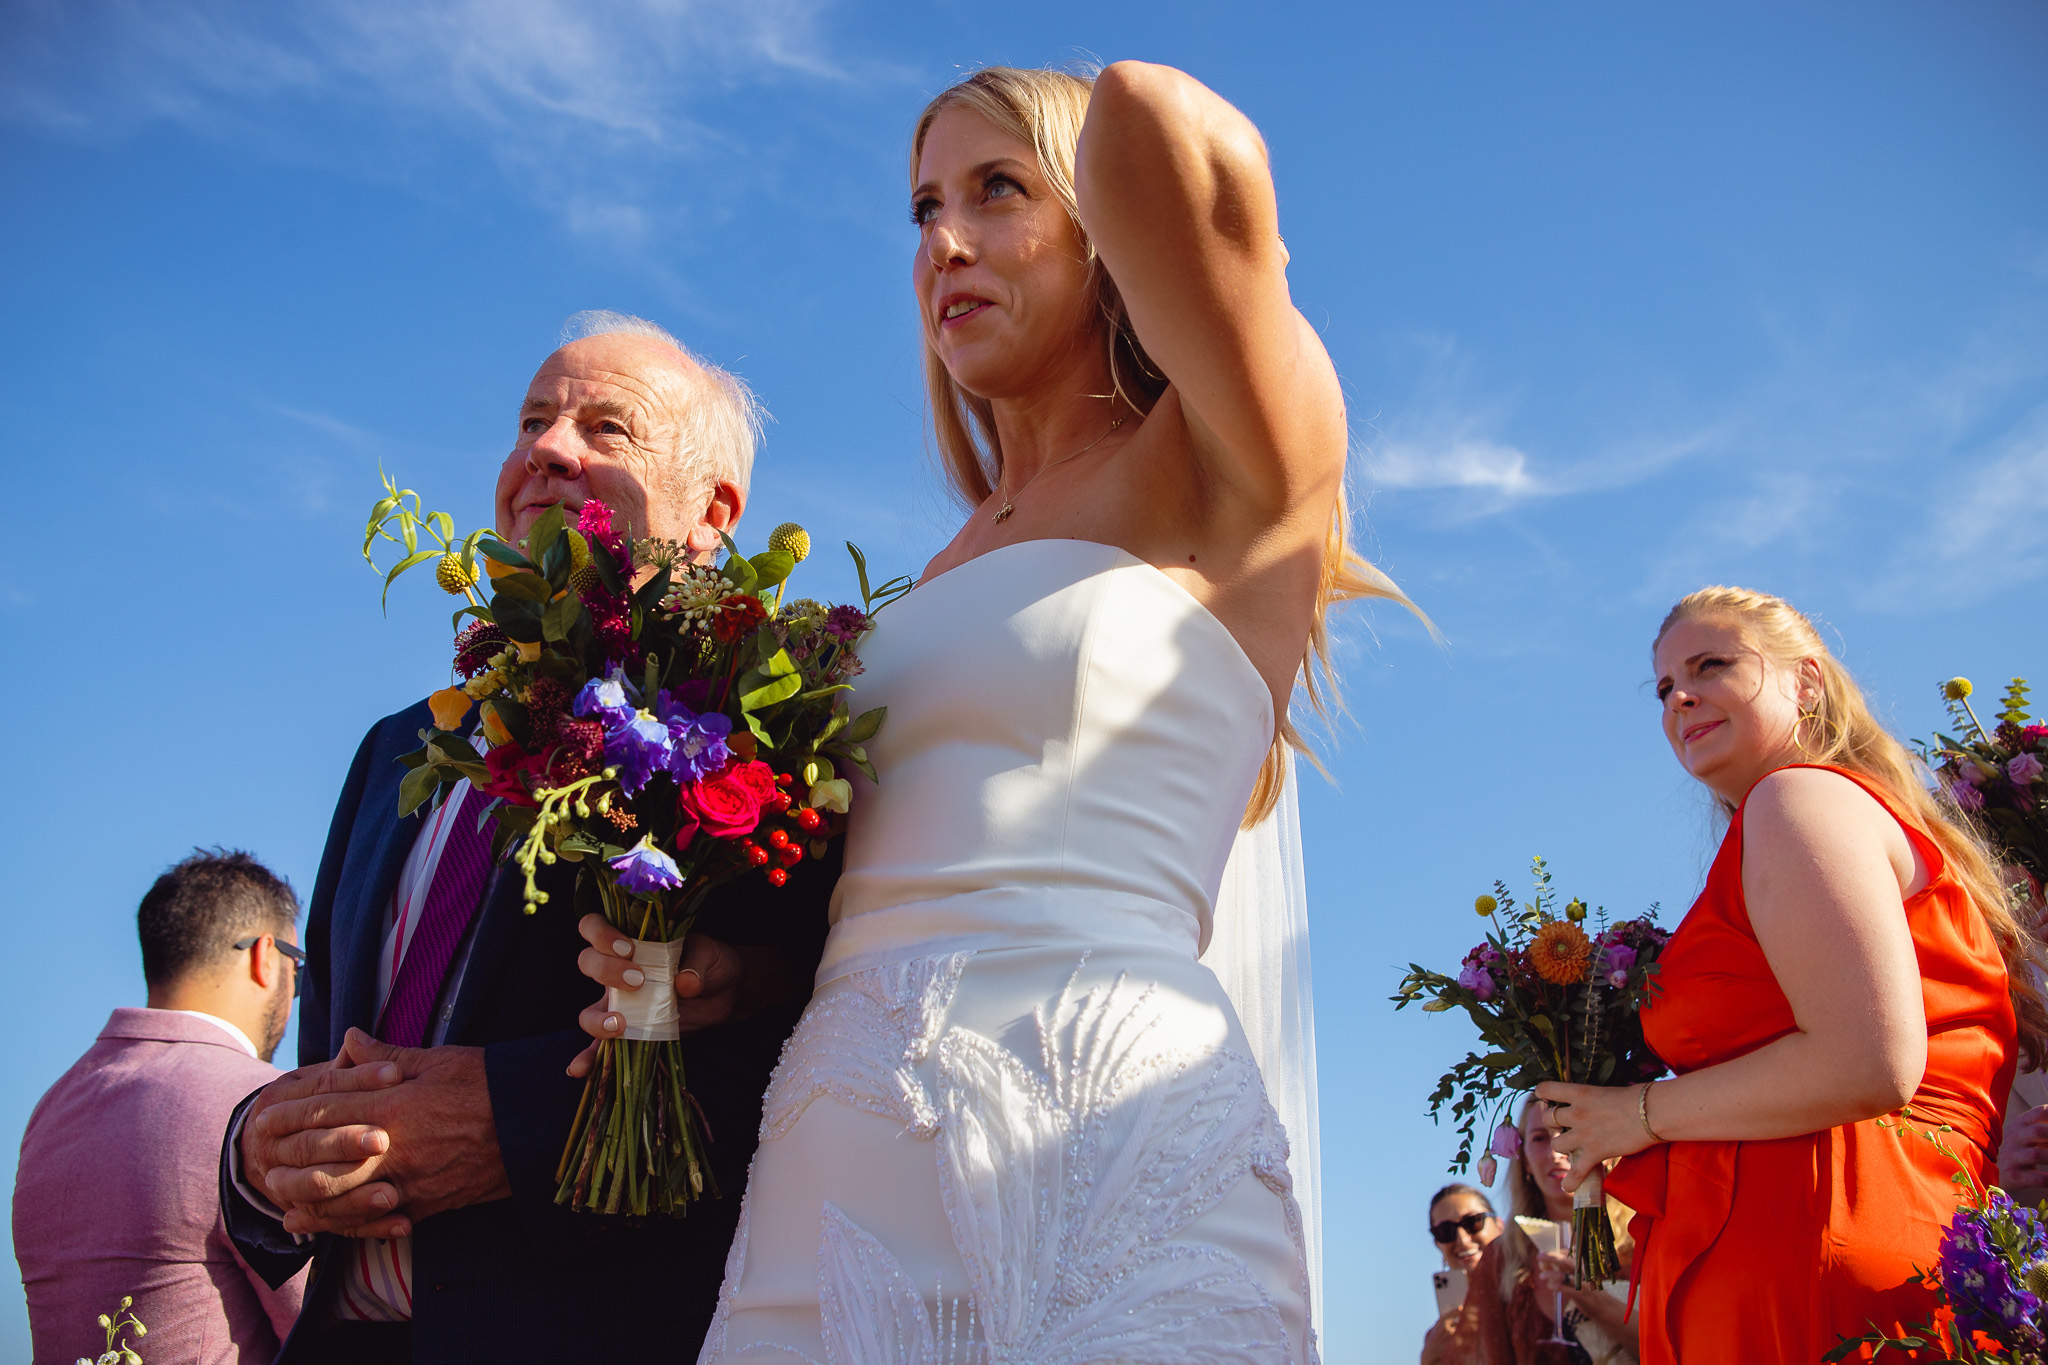 The bride and her dad walk down the aisle at a wedding ceremony at Ambelonas Vineyard, Corfu